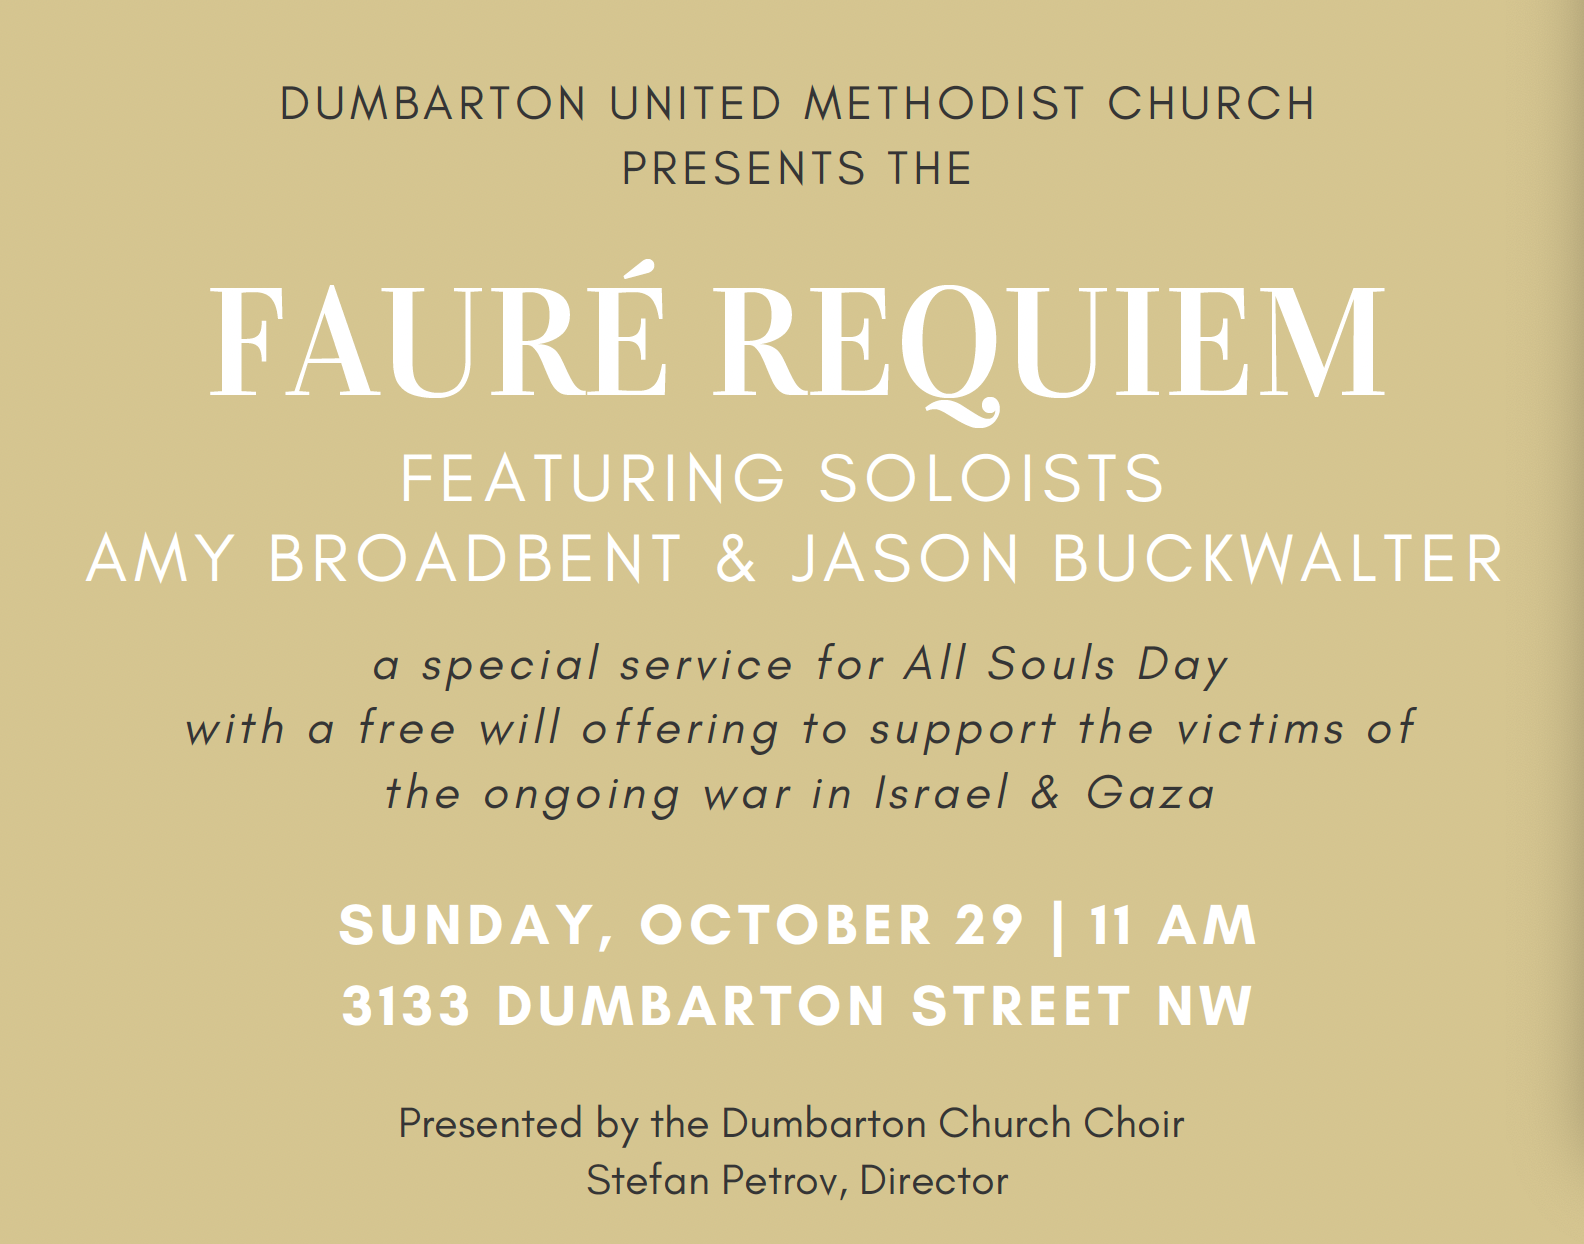 Dumbarton United Methodist Church proudly presents Gabriel Fauré's timeless musical masterpiece. We invite you to witness and take part in a worship service filled with beauty, reflection, and breathtaking music as we celebrate the power of the human spirit.